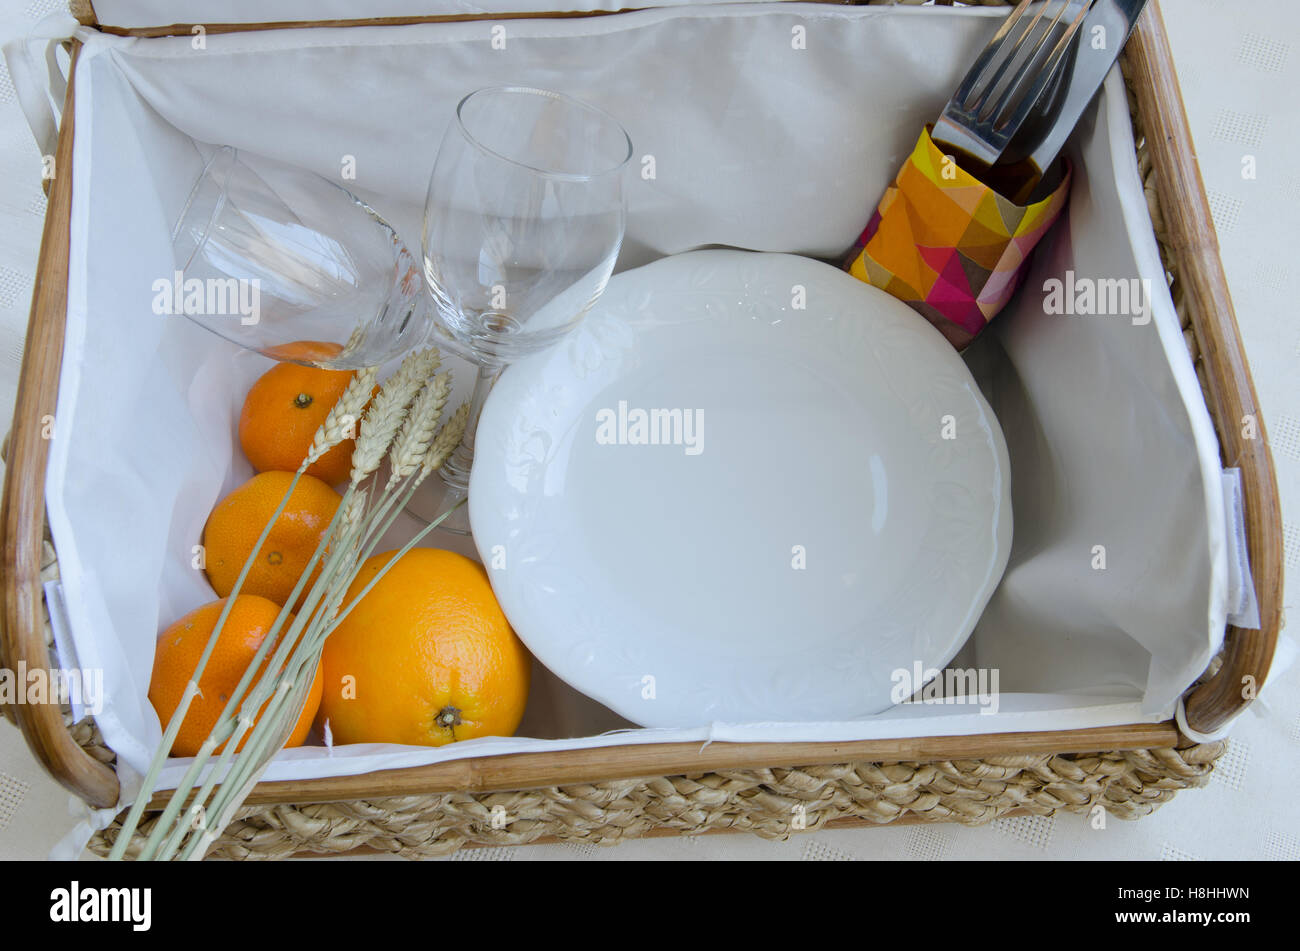 Picnic basket with wine glasses, fruit and food Stock Photo